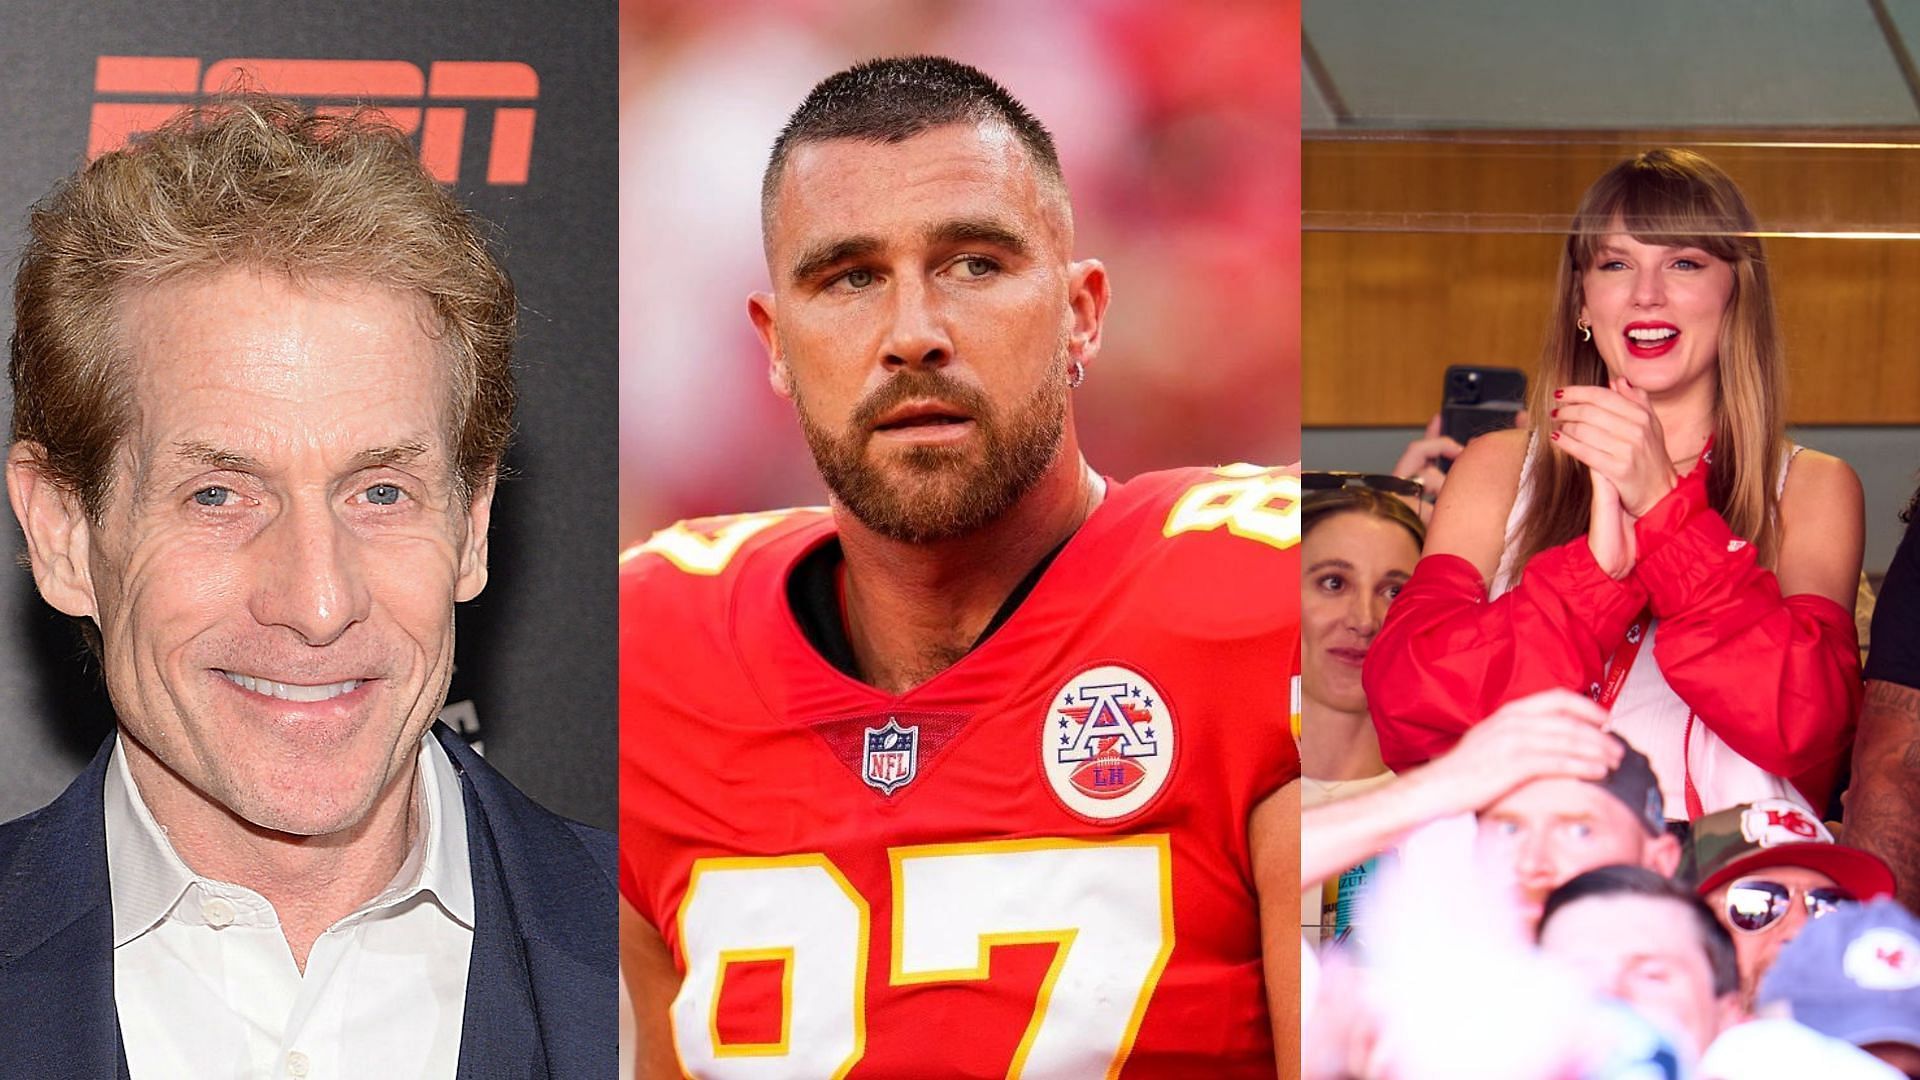 Skip Bayless takes shots at Travis Kelce&rsquo;s girlfriend, labels Taylor Swift a &lsquo;distraction&rsquo;